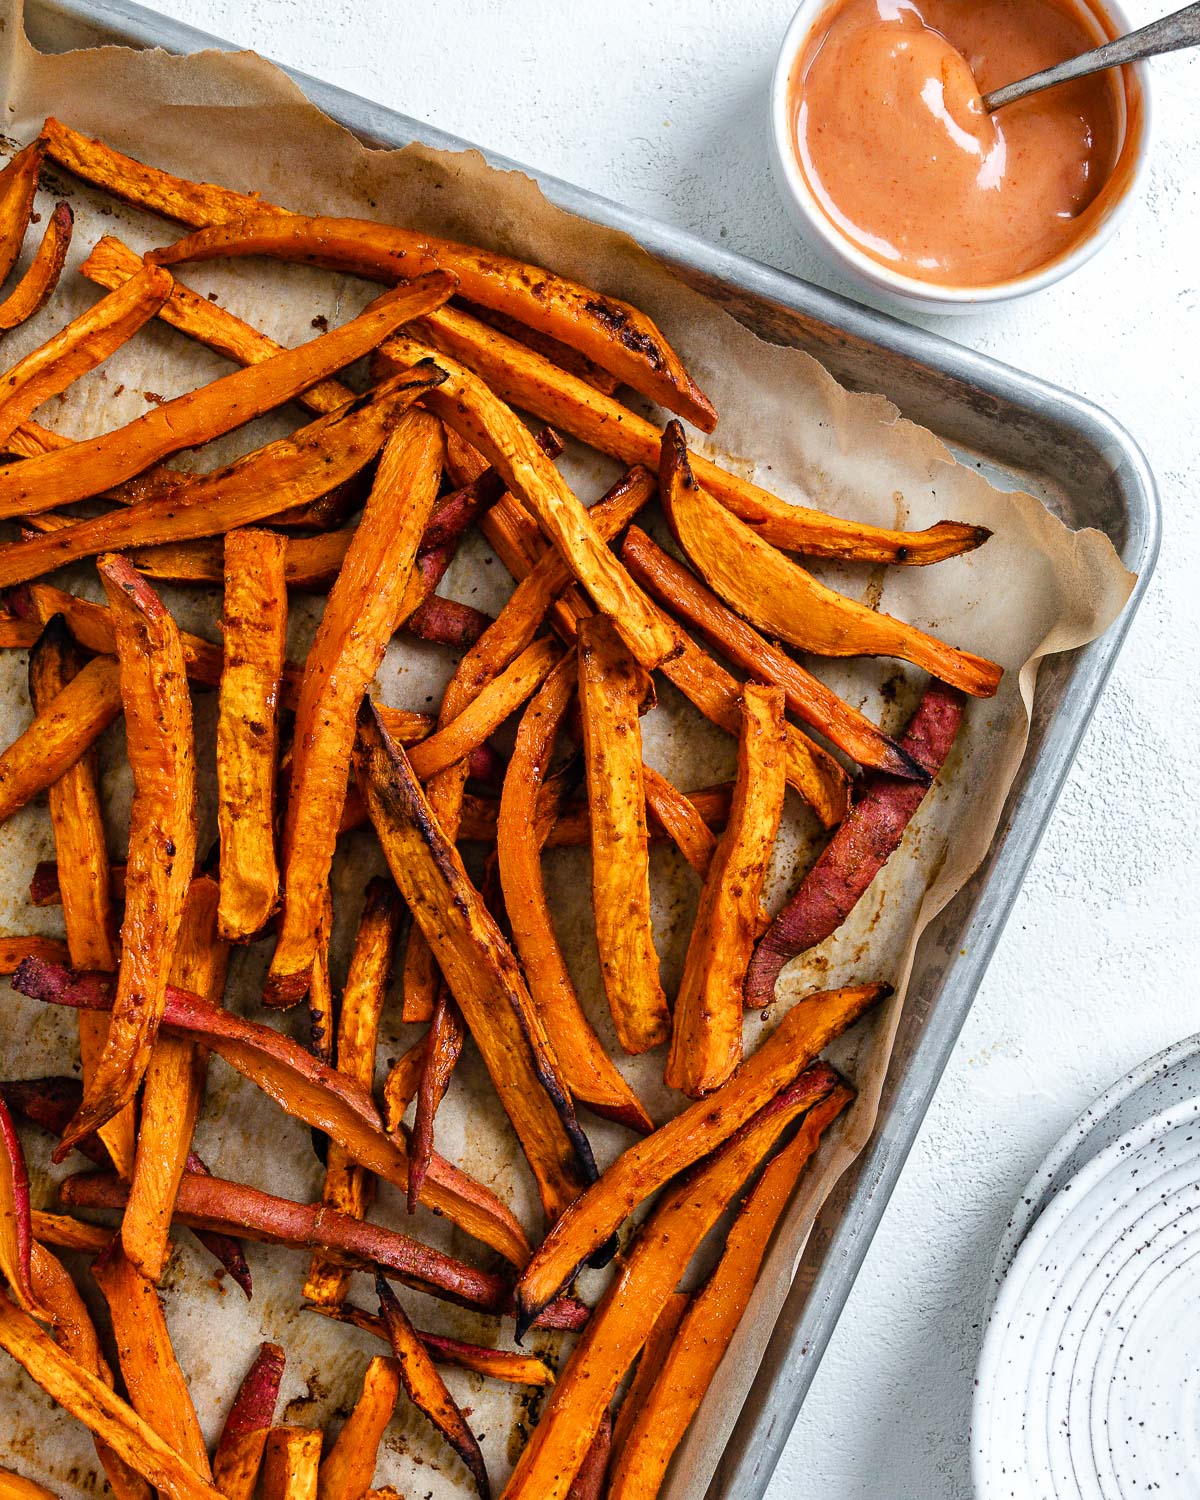 completed sweet potato fries in a baking tray with a small bowl of sauce